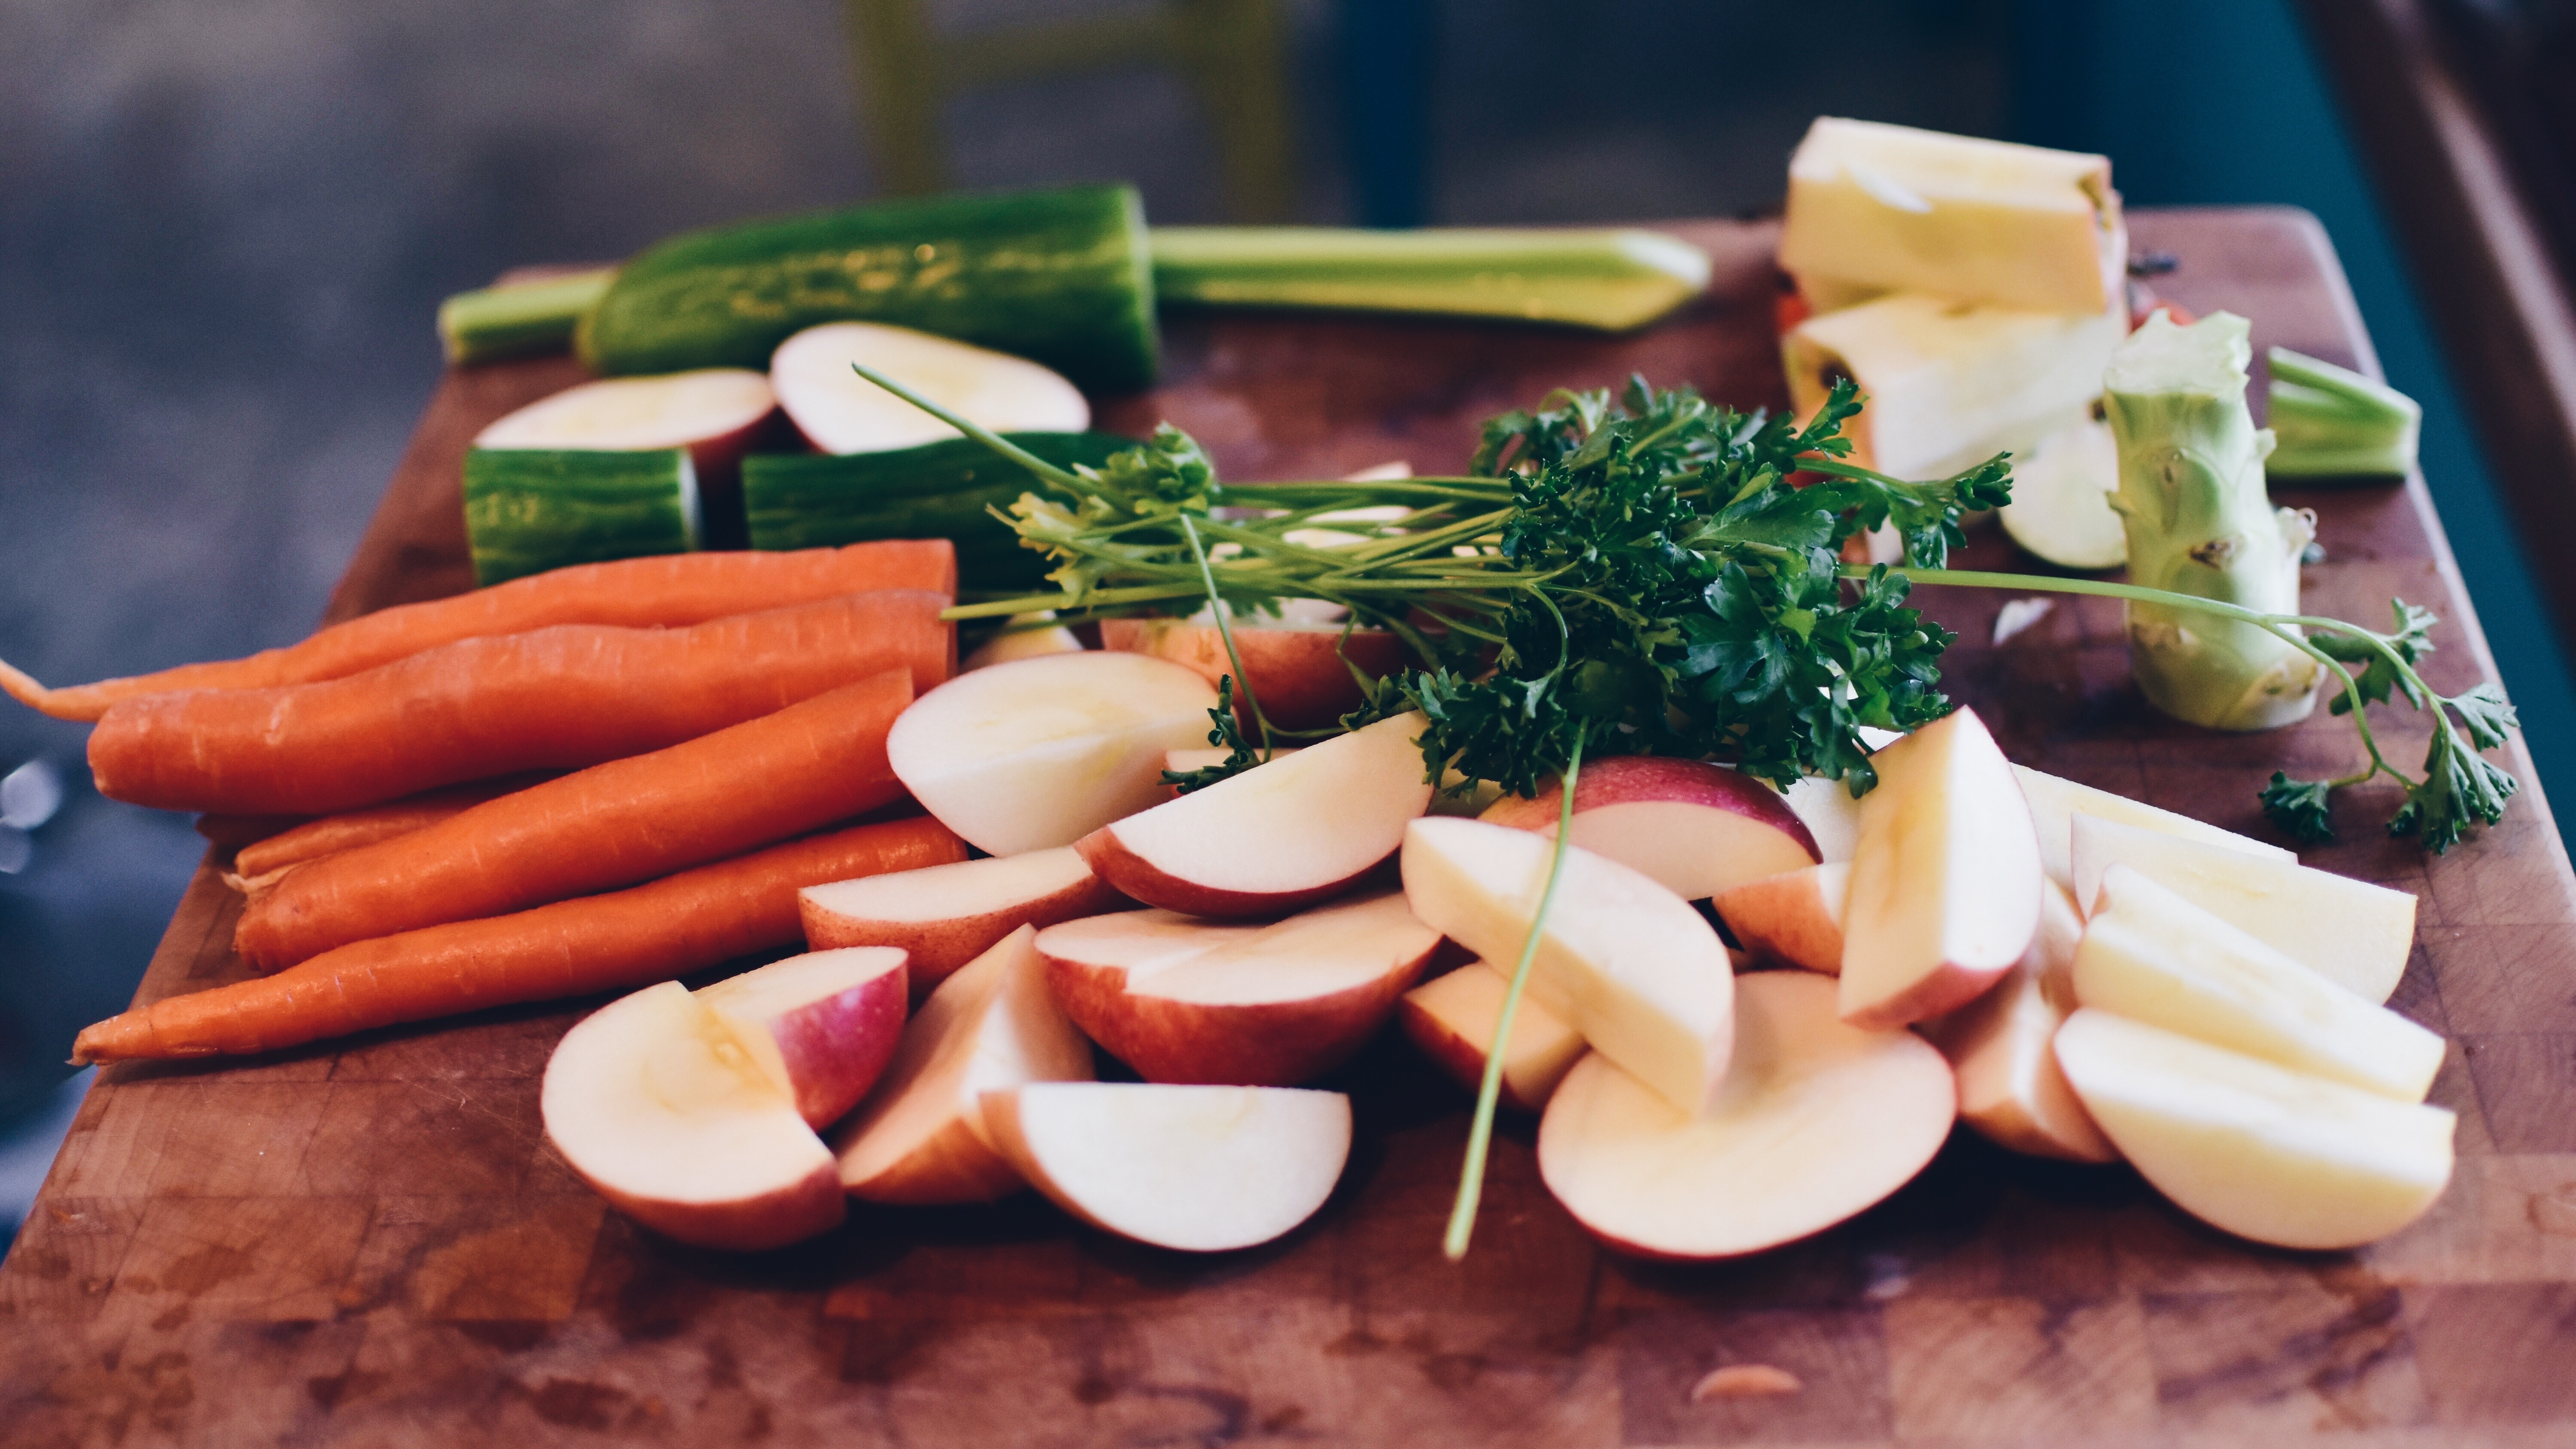 food, apples, vegetables, cutting board, parsley, carrot, broccoli, cucumber